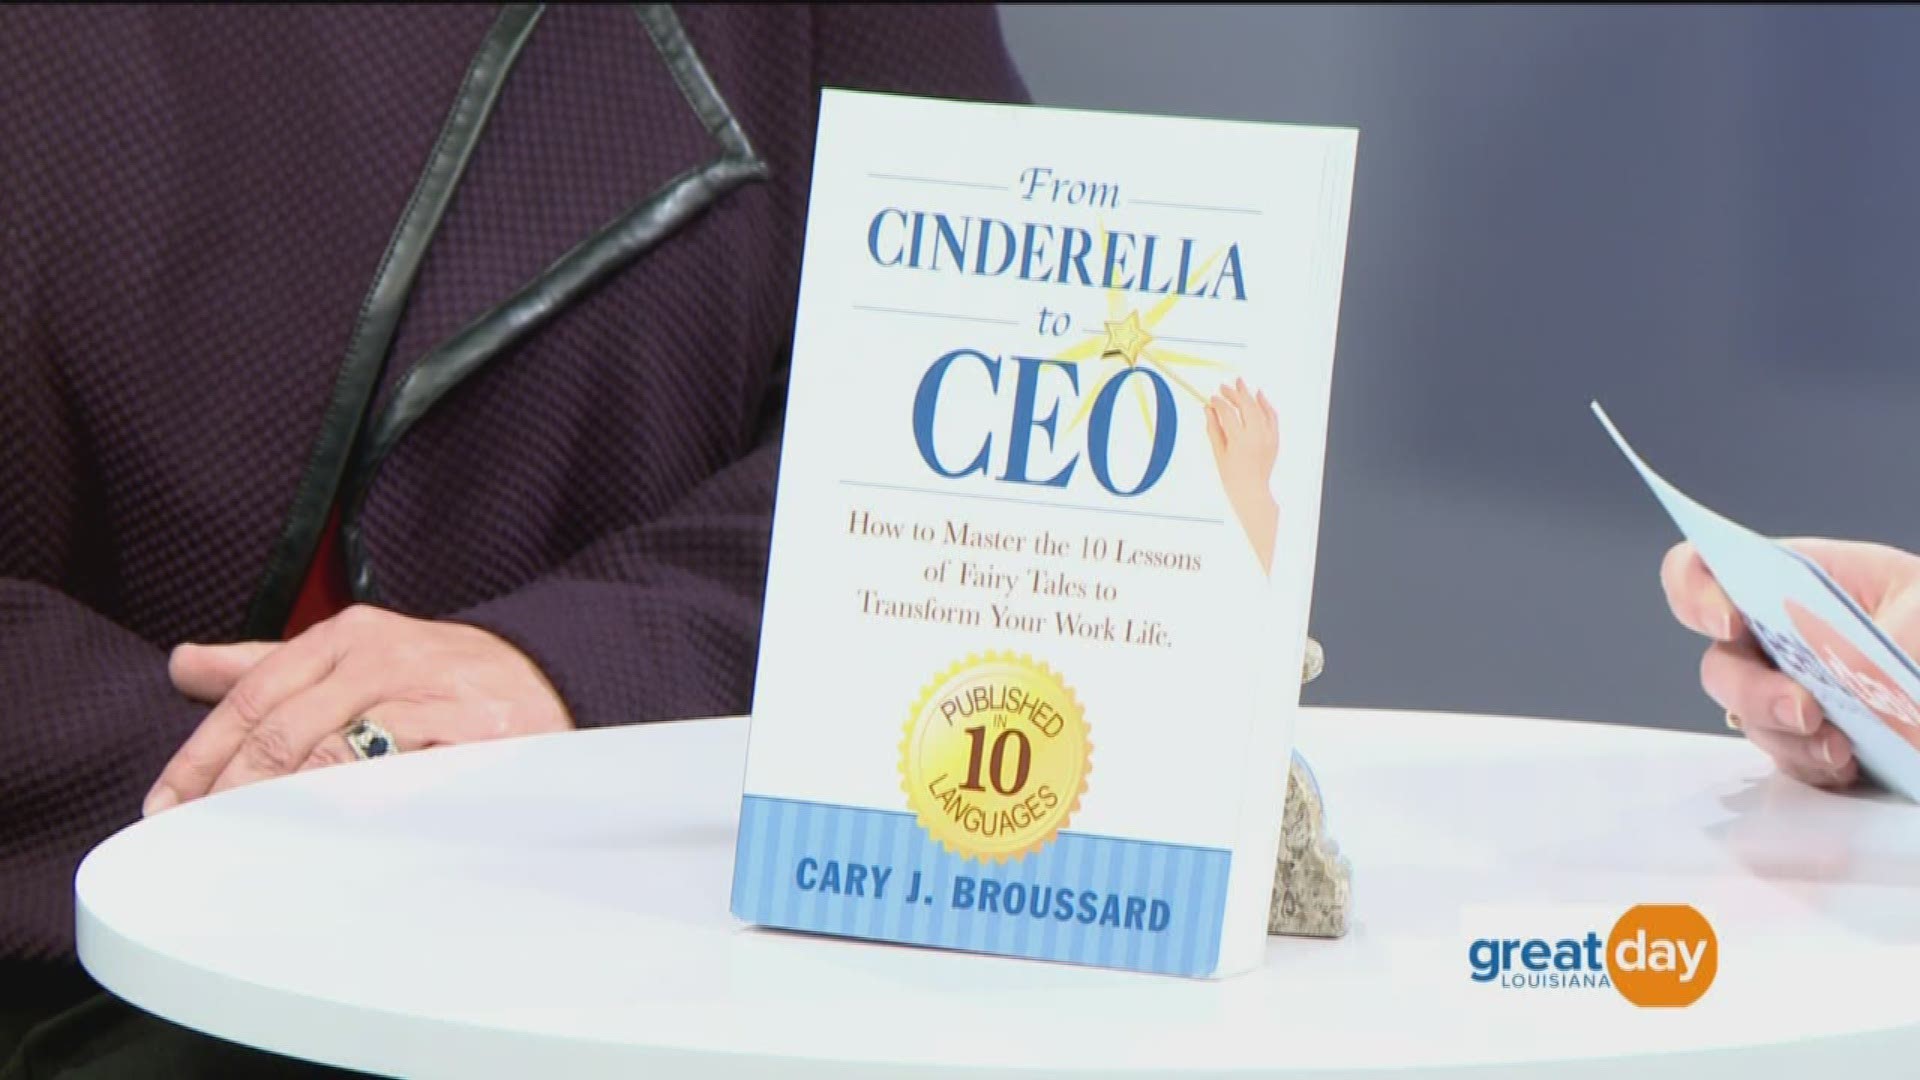 Cary Broussard collects stories of female empowerment from around the country for the Cinderella to CEO Awards. For more information go to CinderellaCEOAwards.com